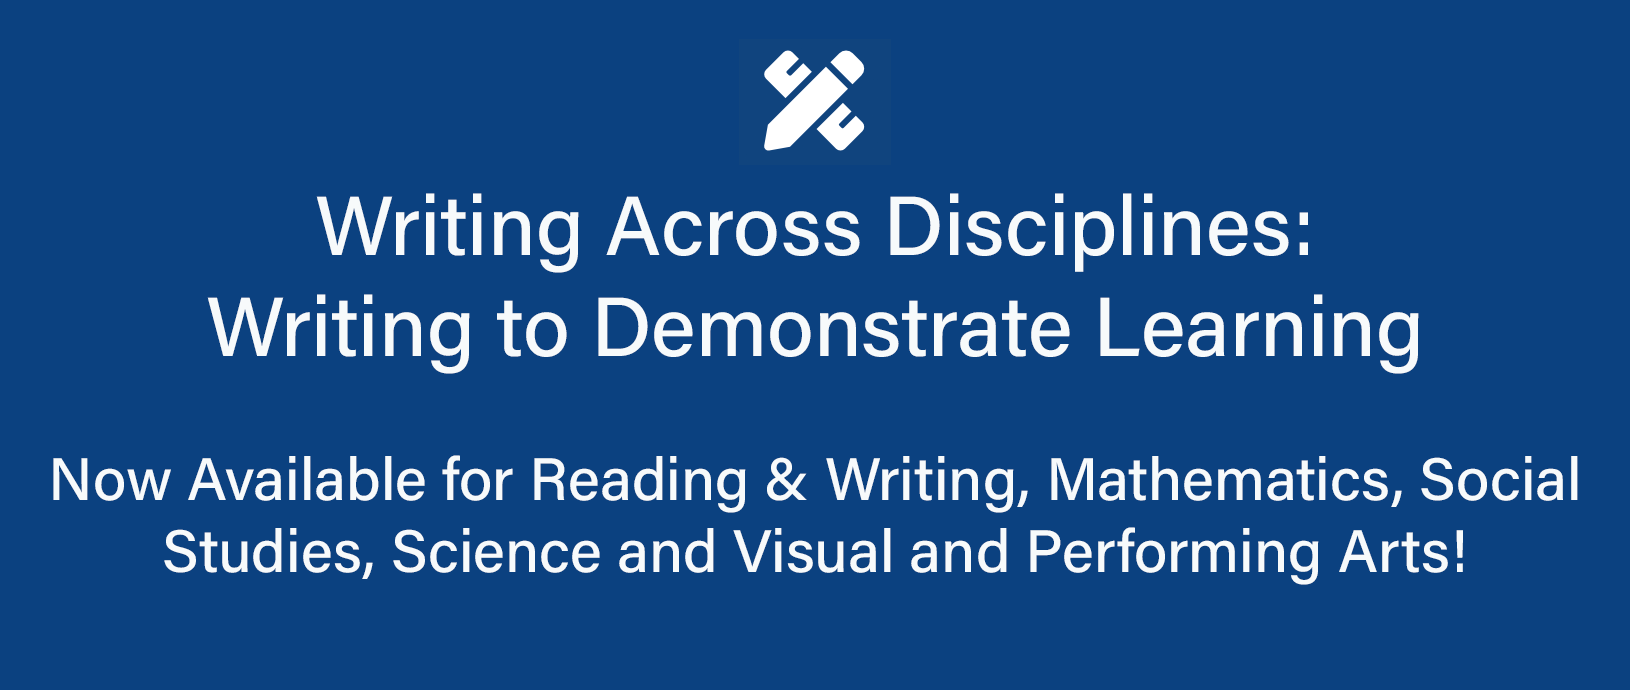 Writing Across Disciplines: Writing to Demonstrate Learning now available for reading and writing, mathematics, social studies, science, and visual and performing arts!